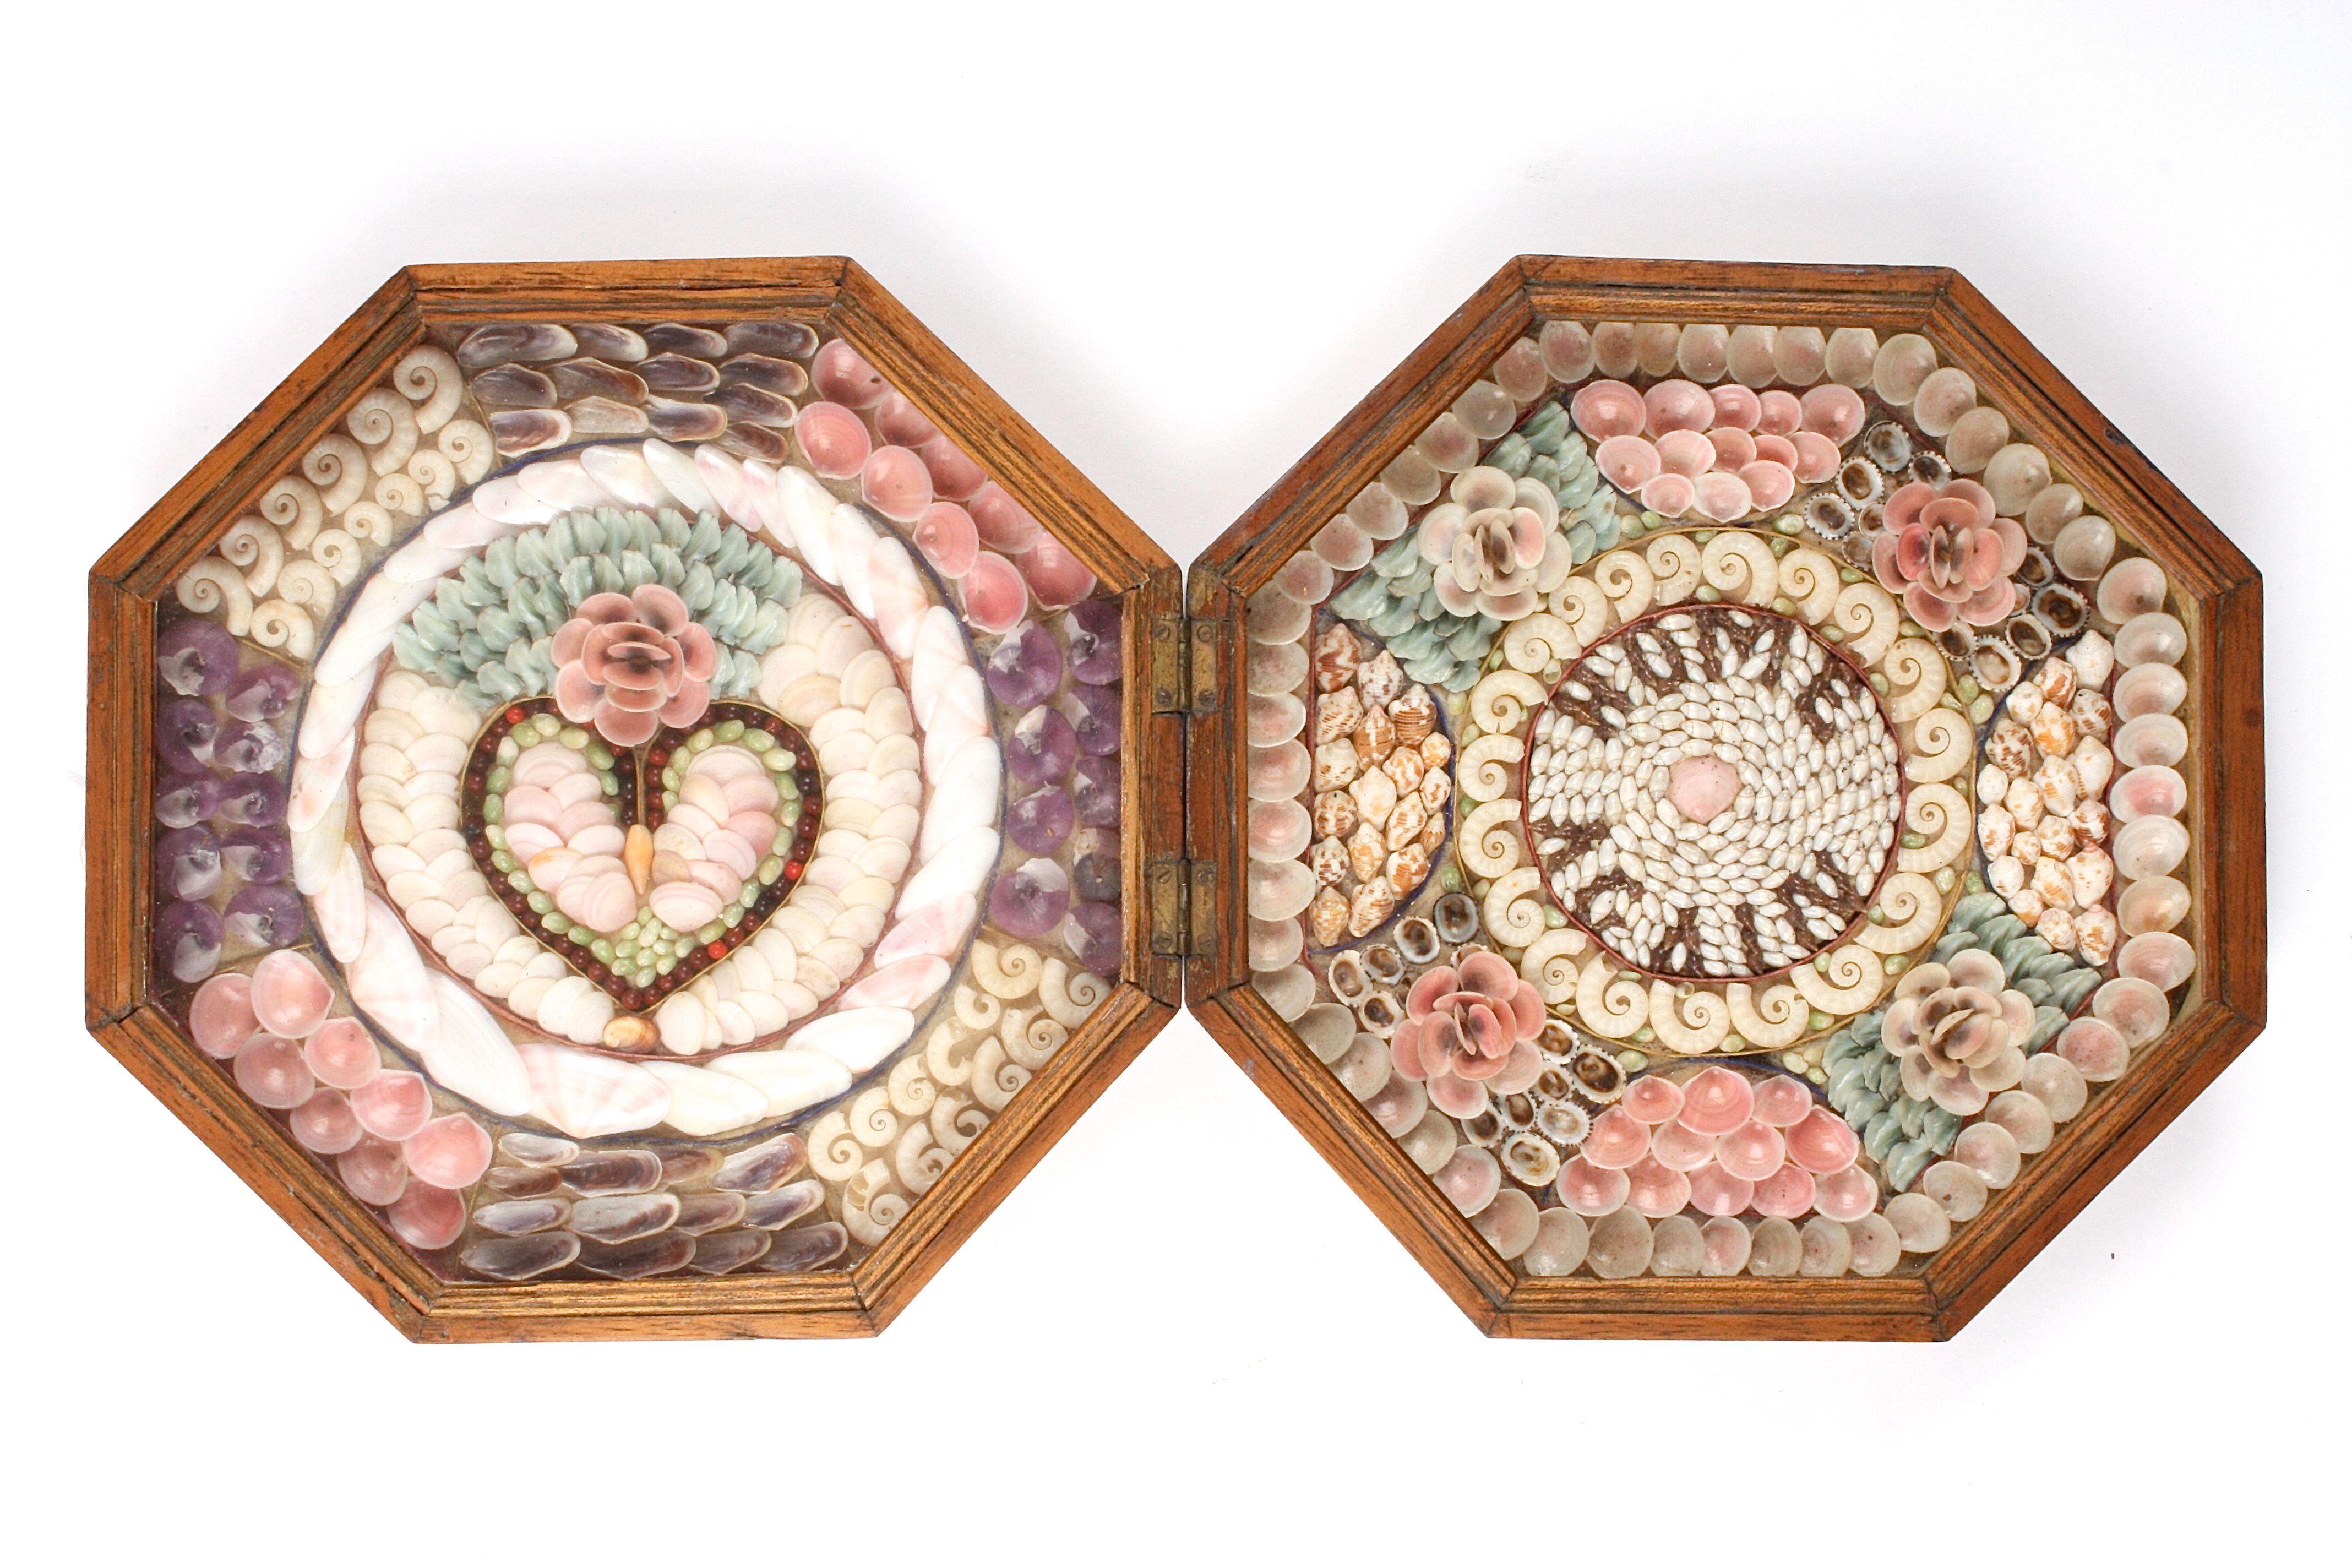 A sailor's shell valentine
West Indies, late 19th century
the octagonal wooden frame opening up to